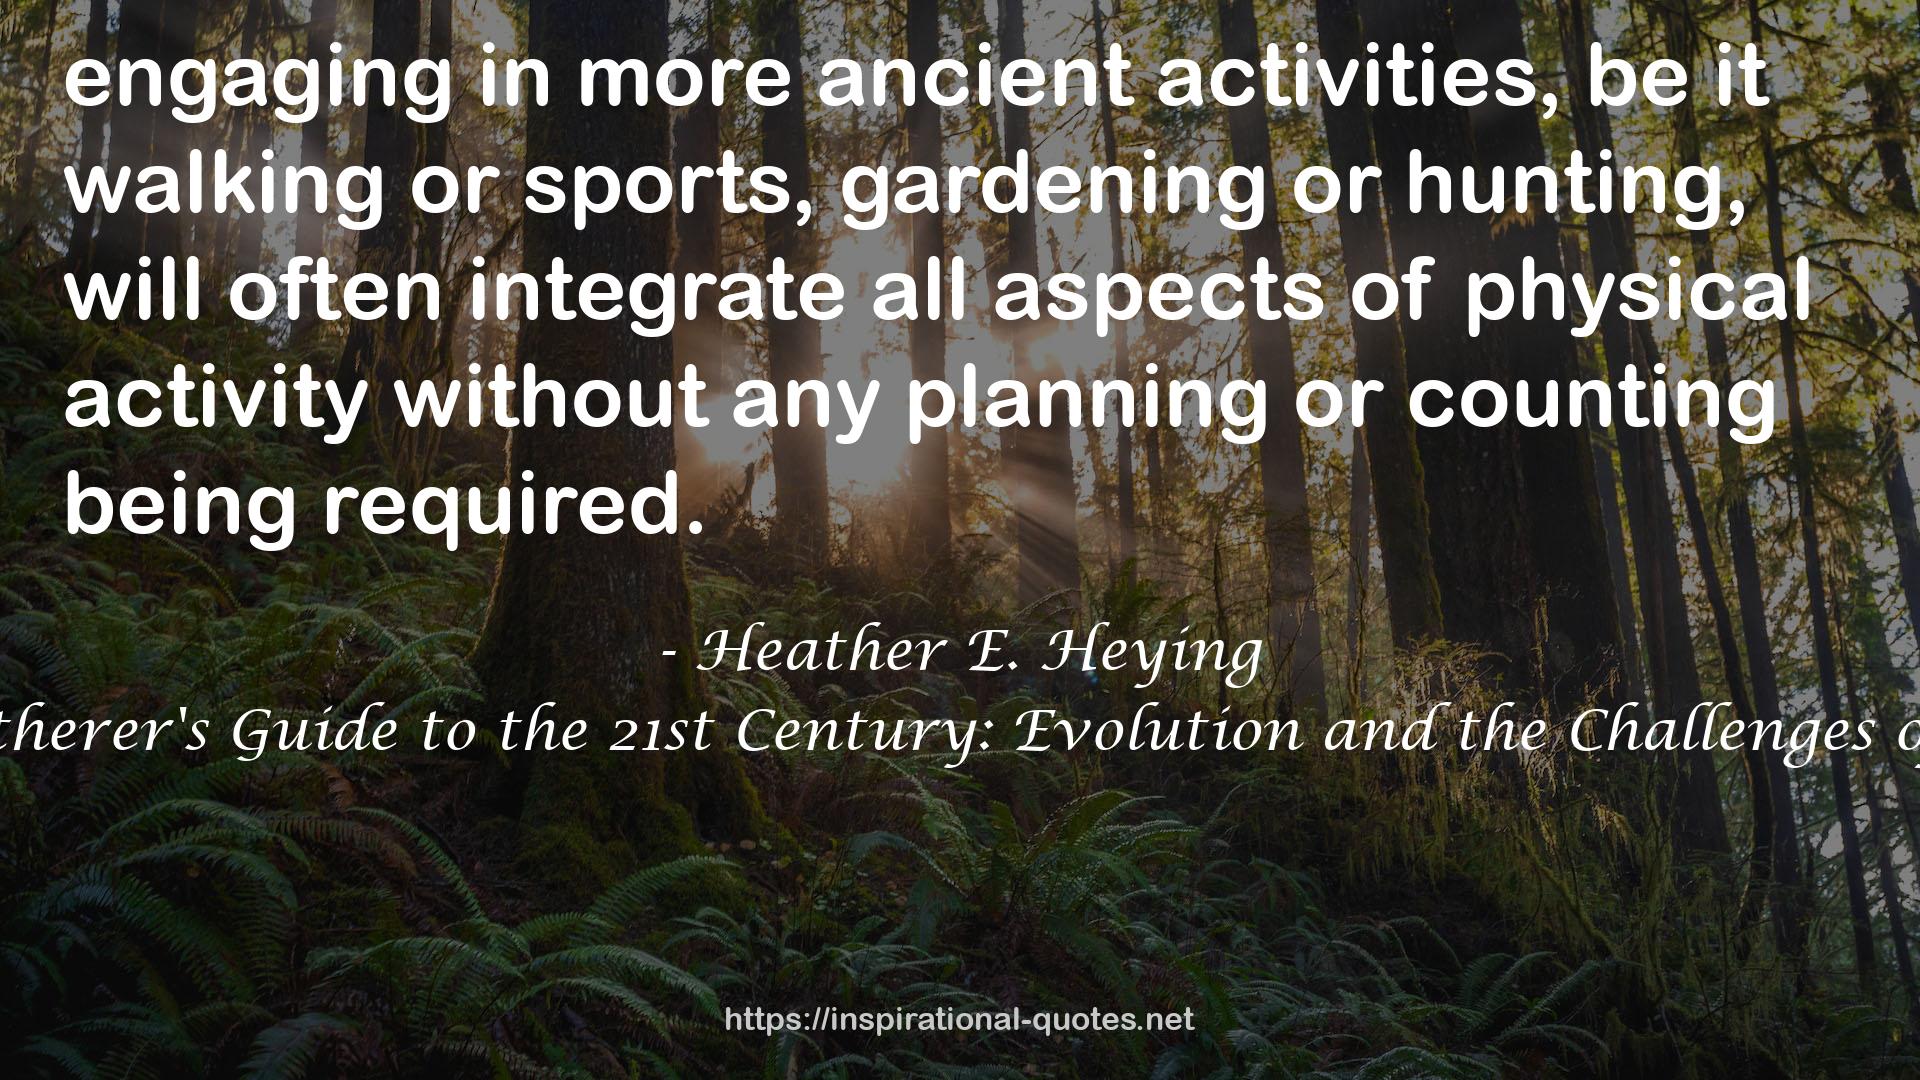 Heather E. Heying QUOTES